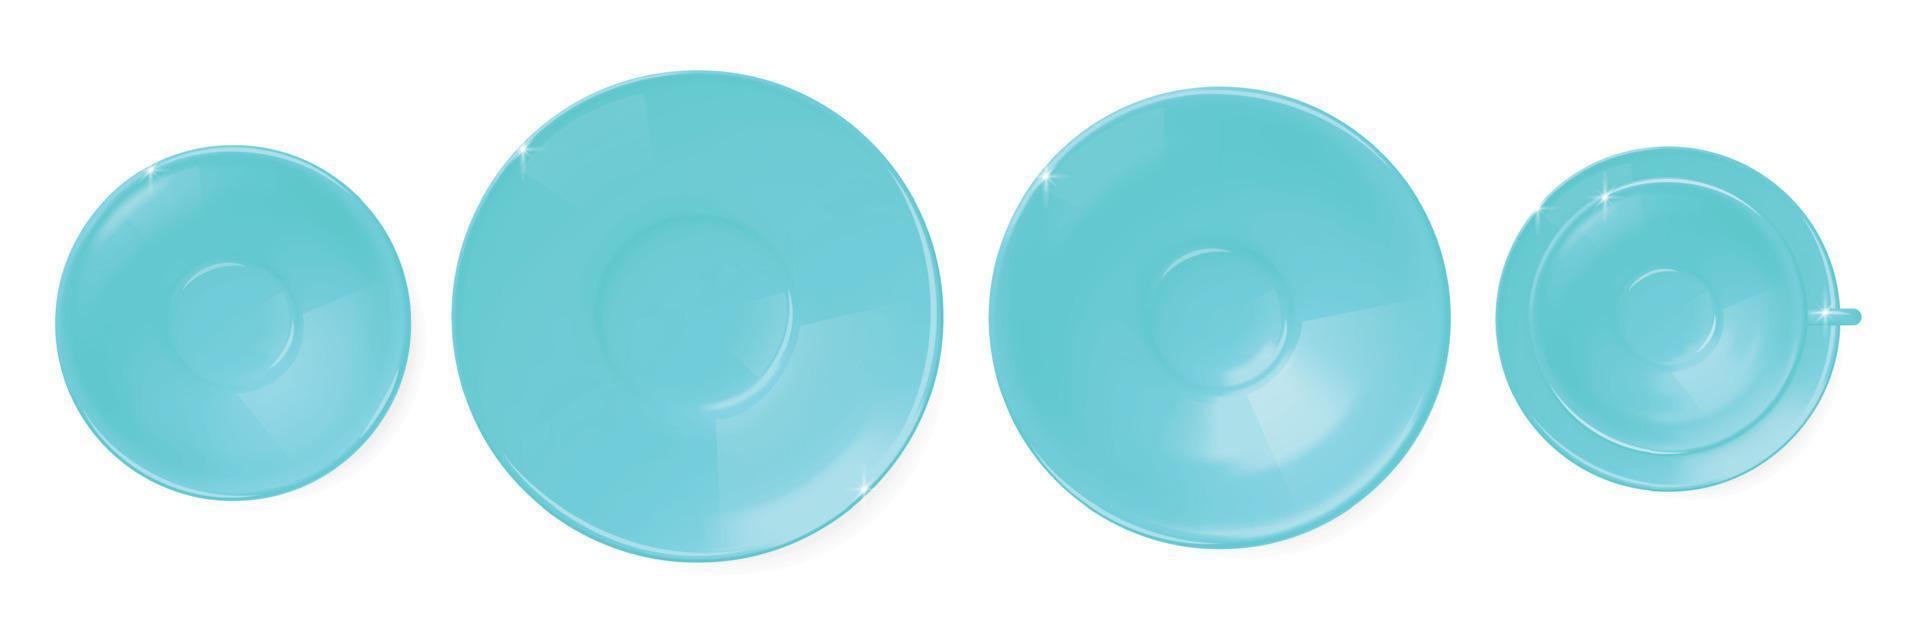 Plates Dishes Realistic Set vector